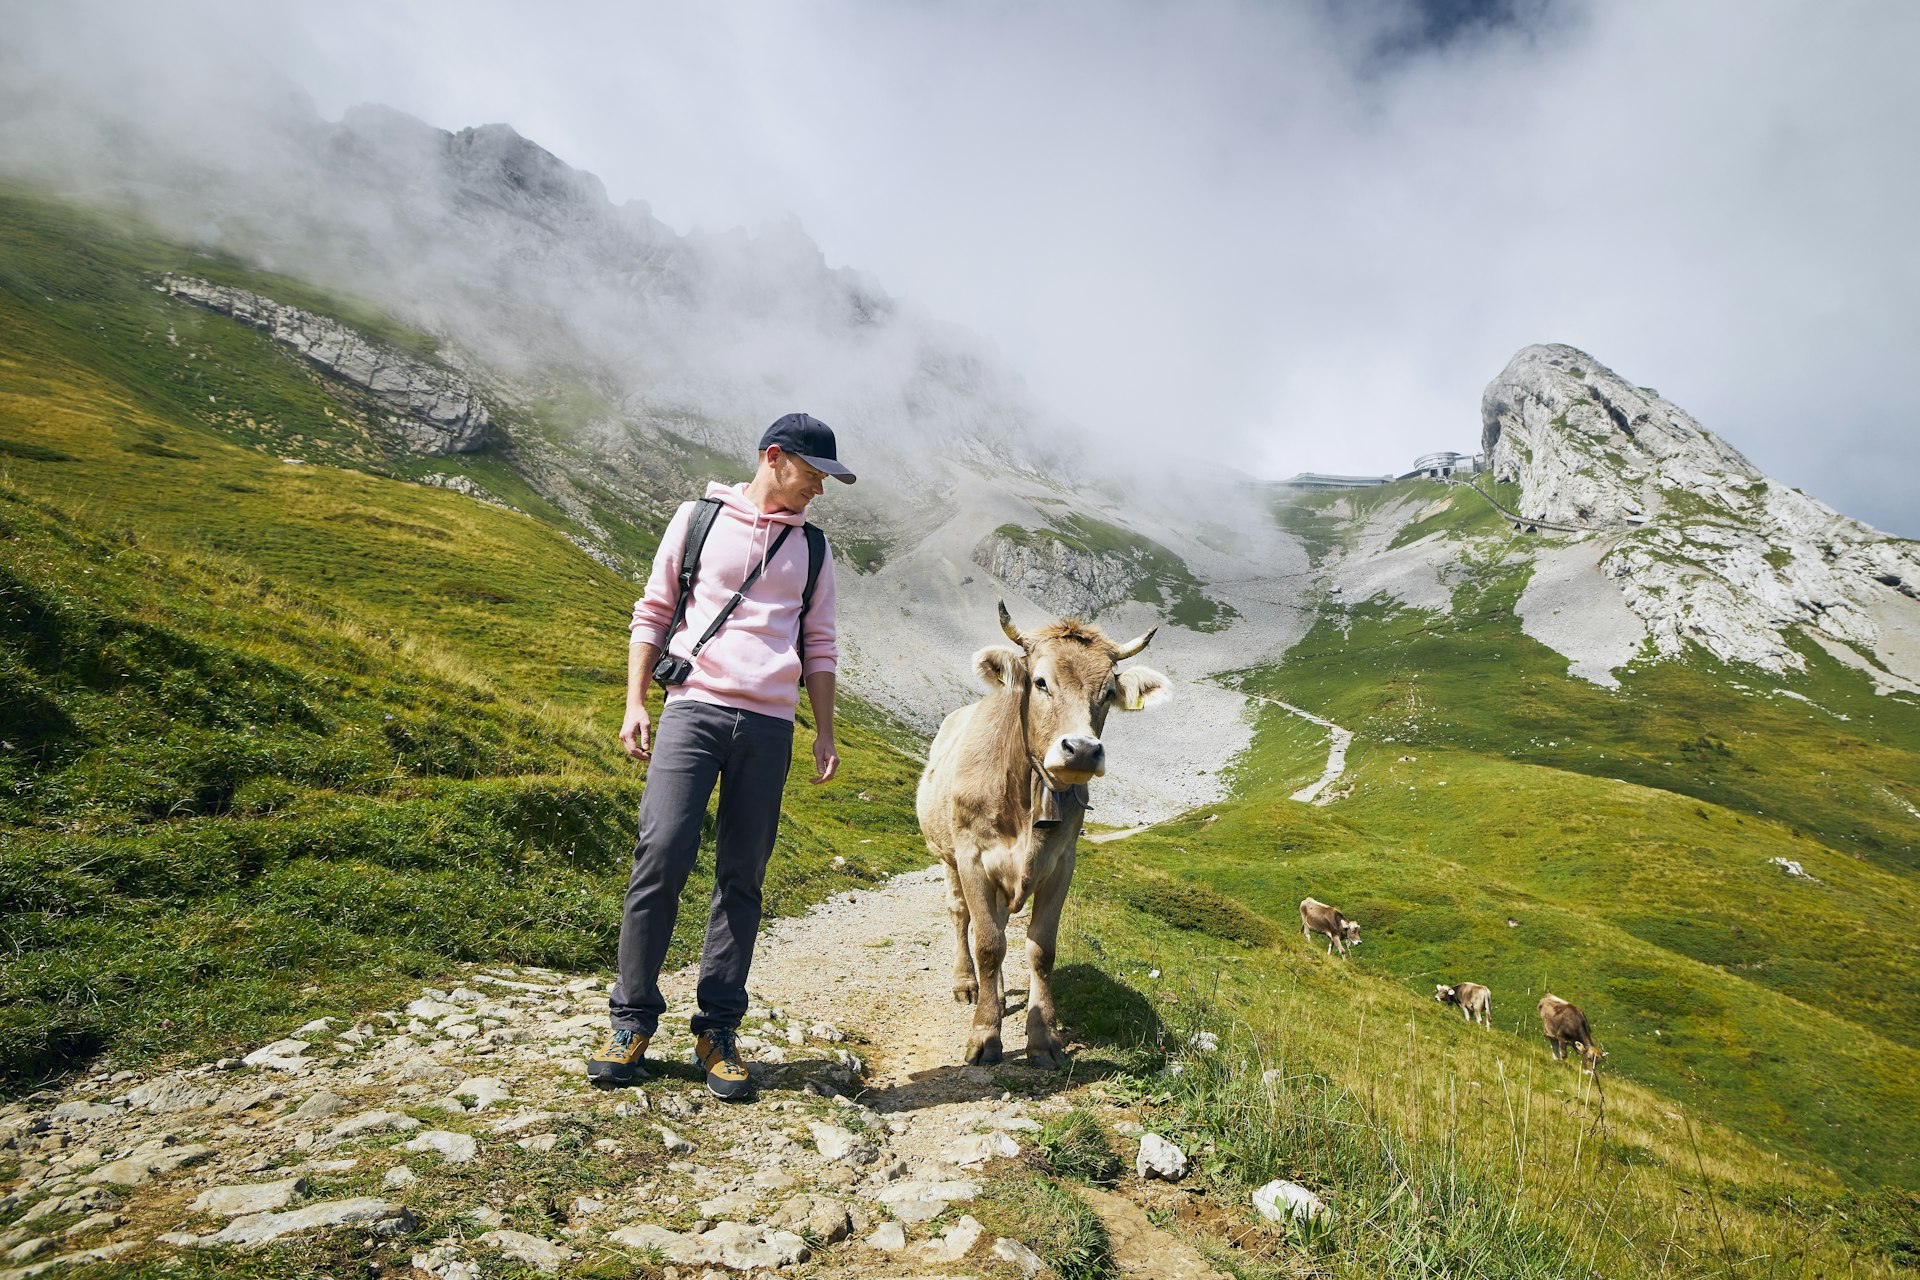 Young man walking with swiss cow on mountain footpath. Mount Pilatus, Lucerne, 